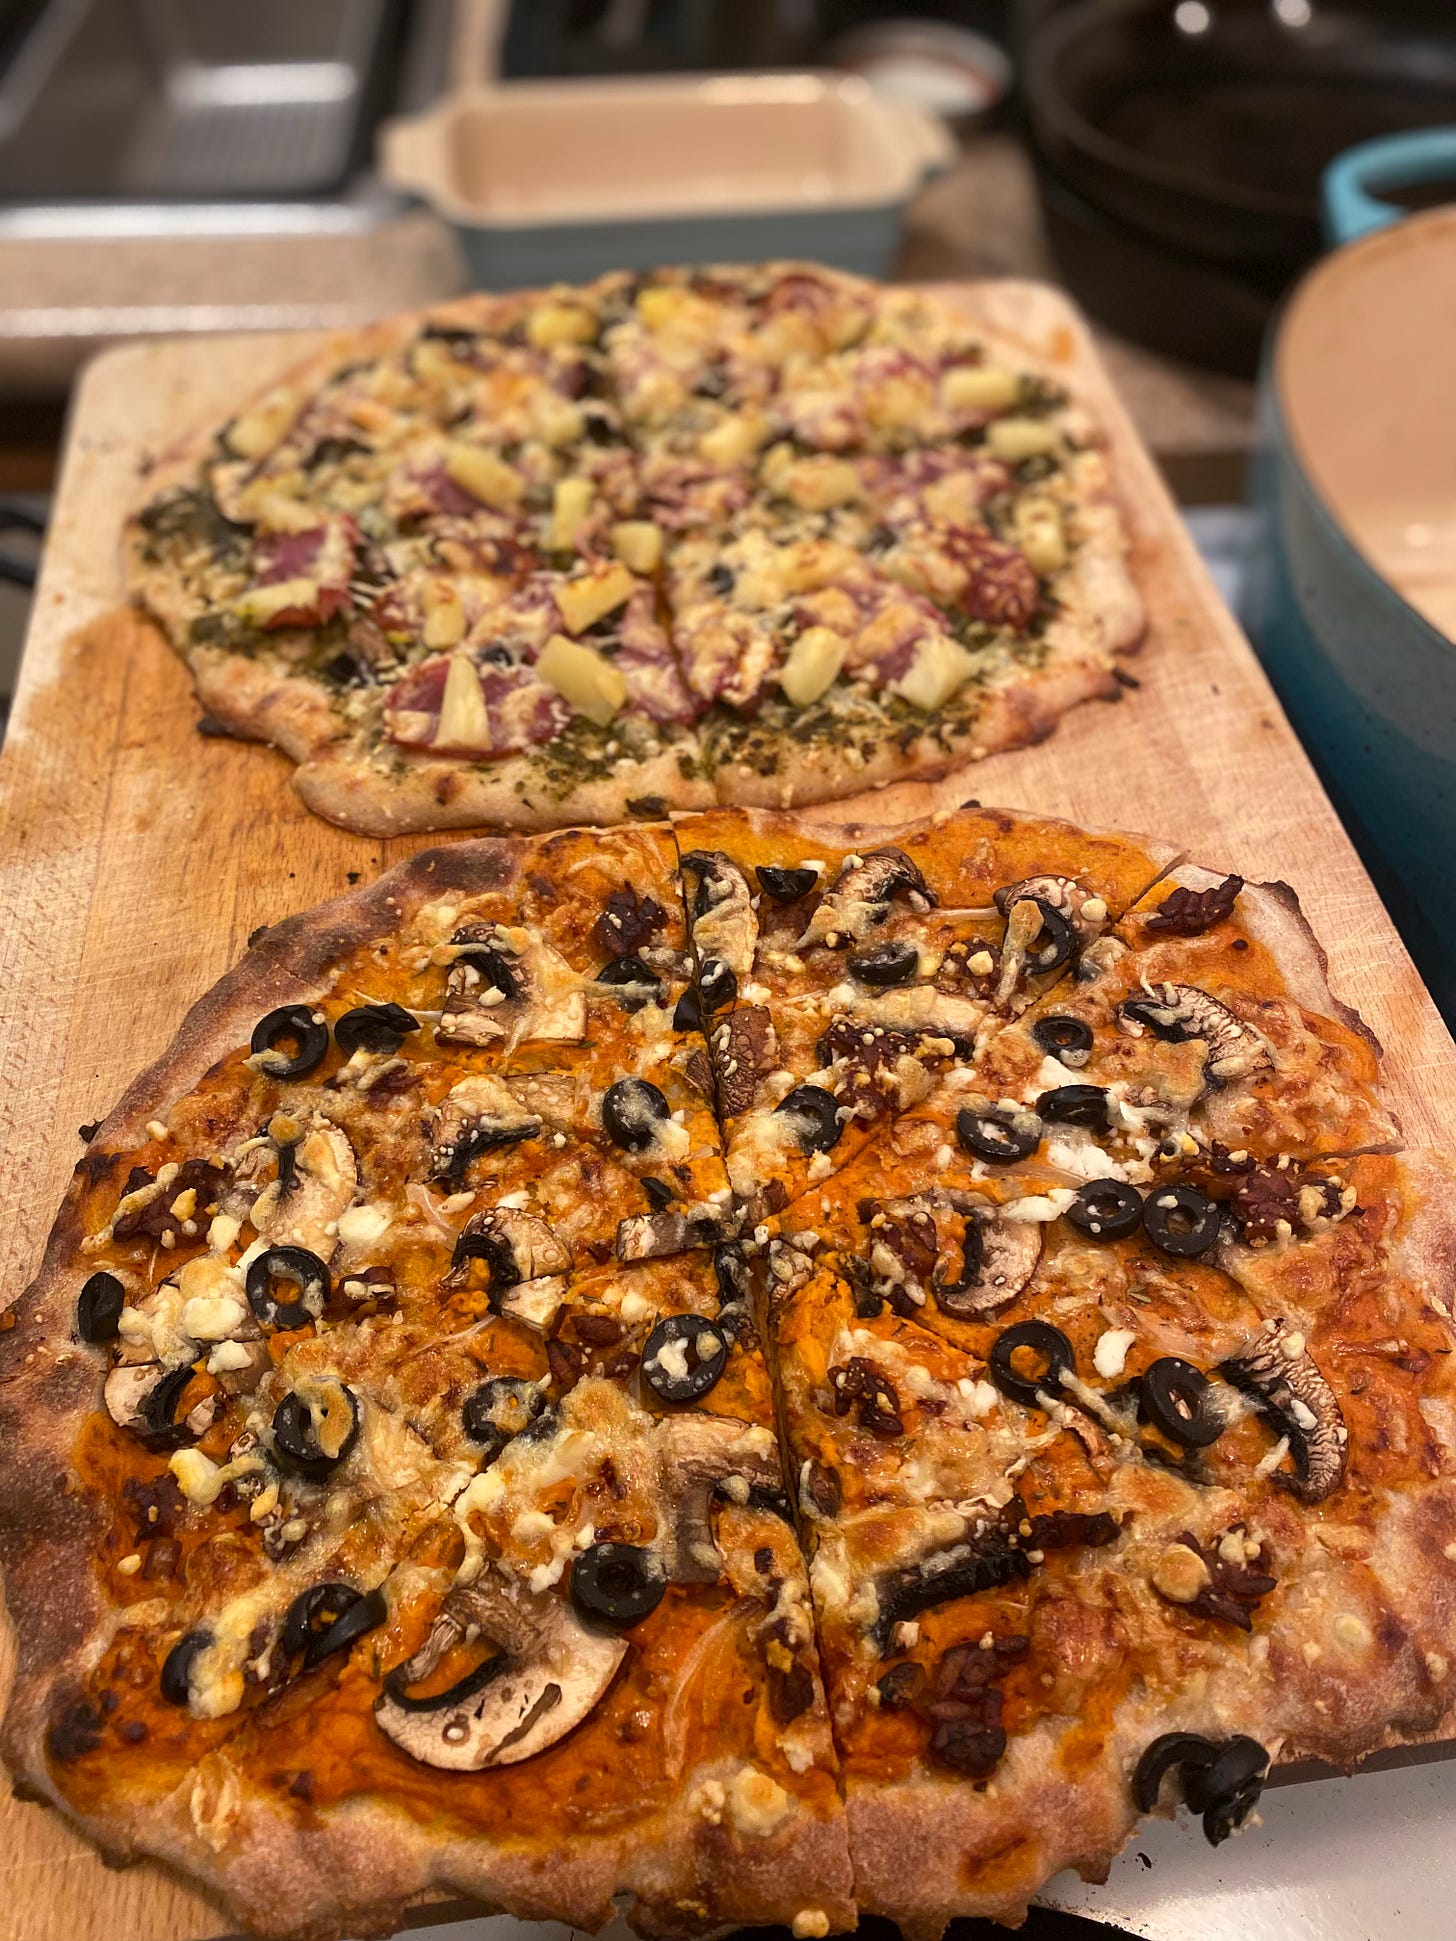 Two pizzas on a wooden cutting board. The nearest has an orange base sauce with olives and mushrooms, and the one in the background has pesto, pineapple, and capocollo.